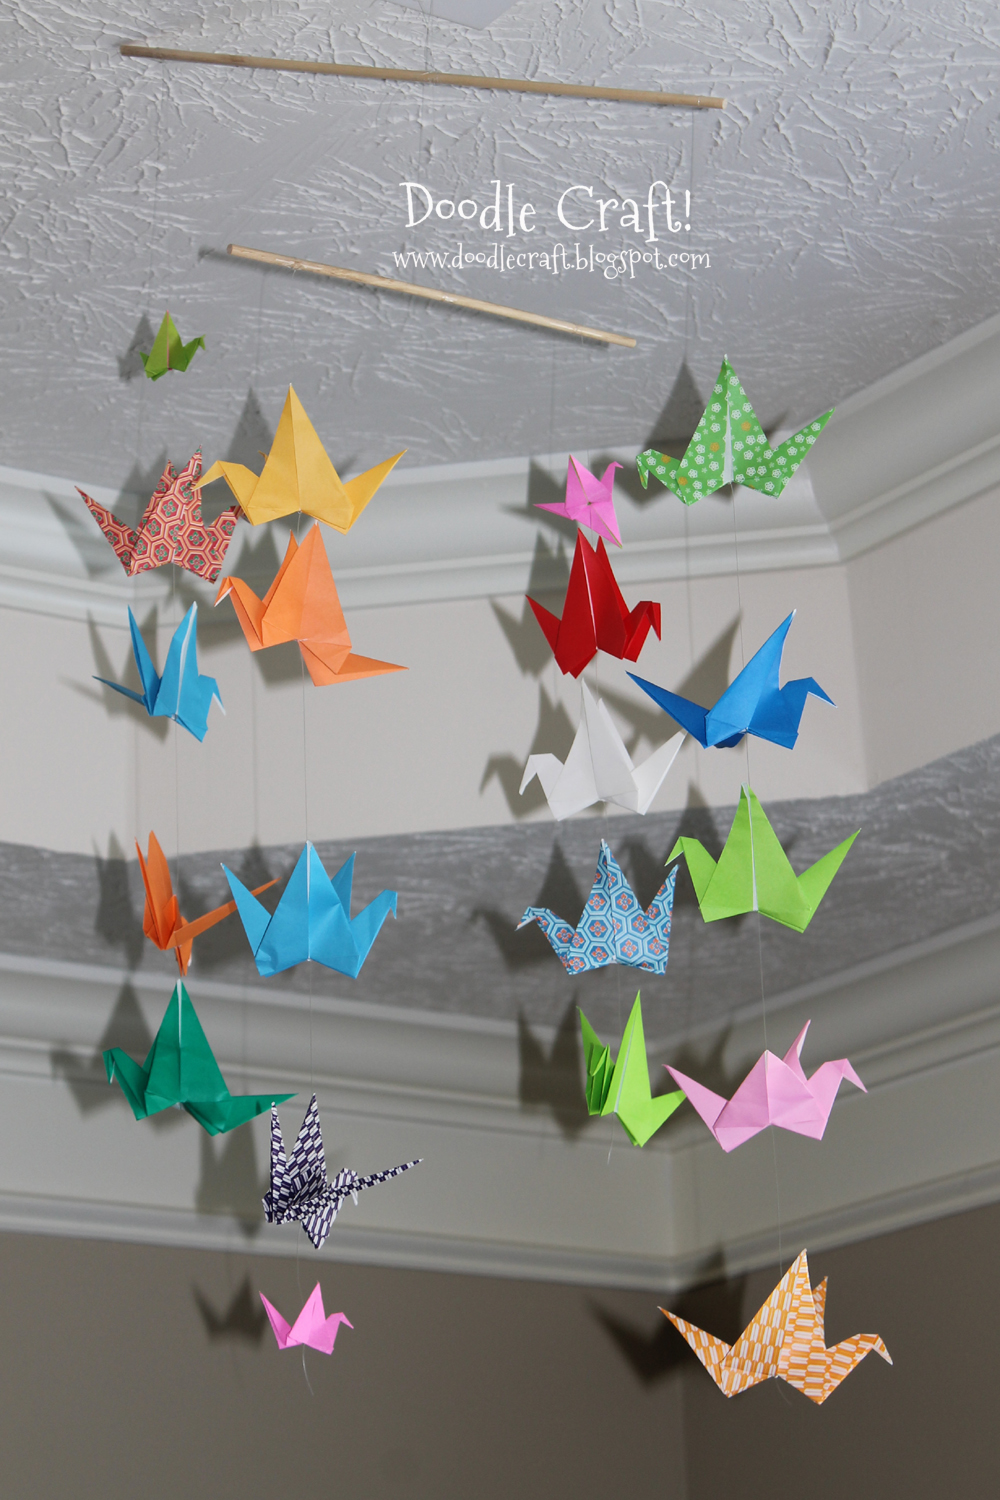 Origami Flapping Paper Crane Mobile!